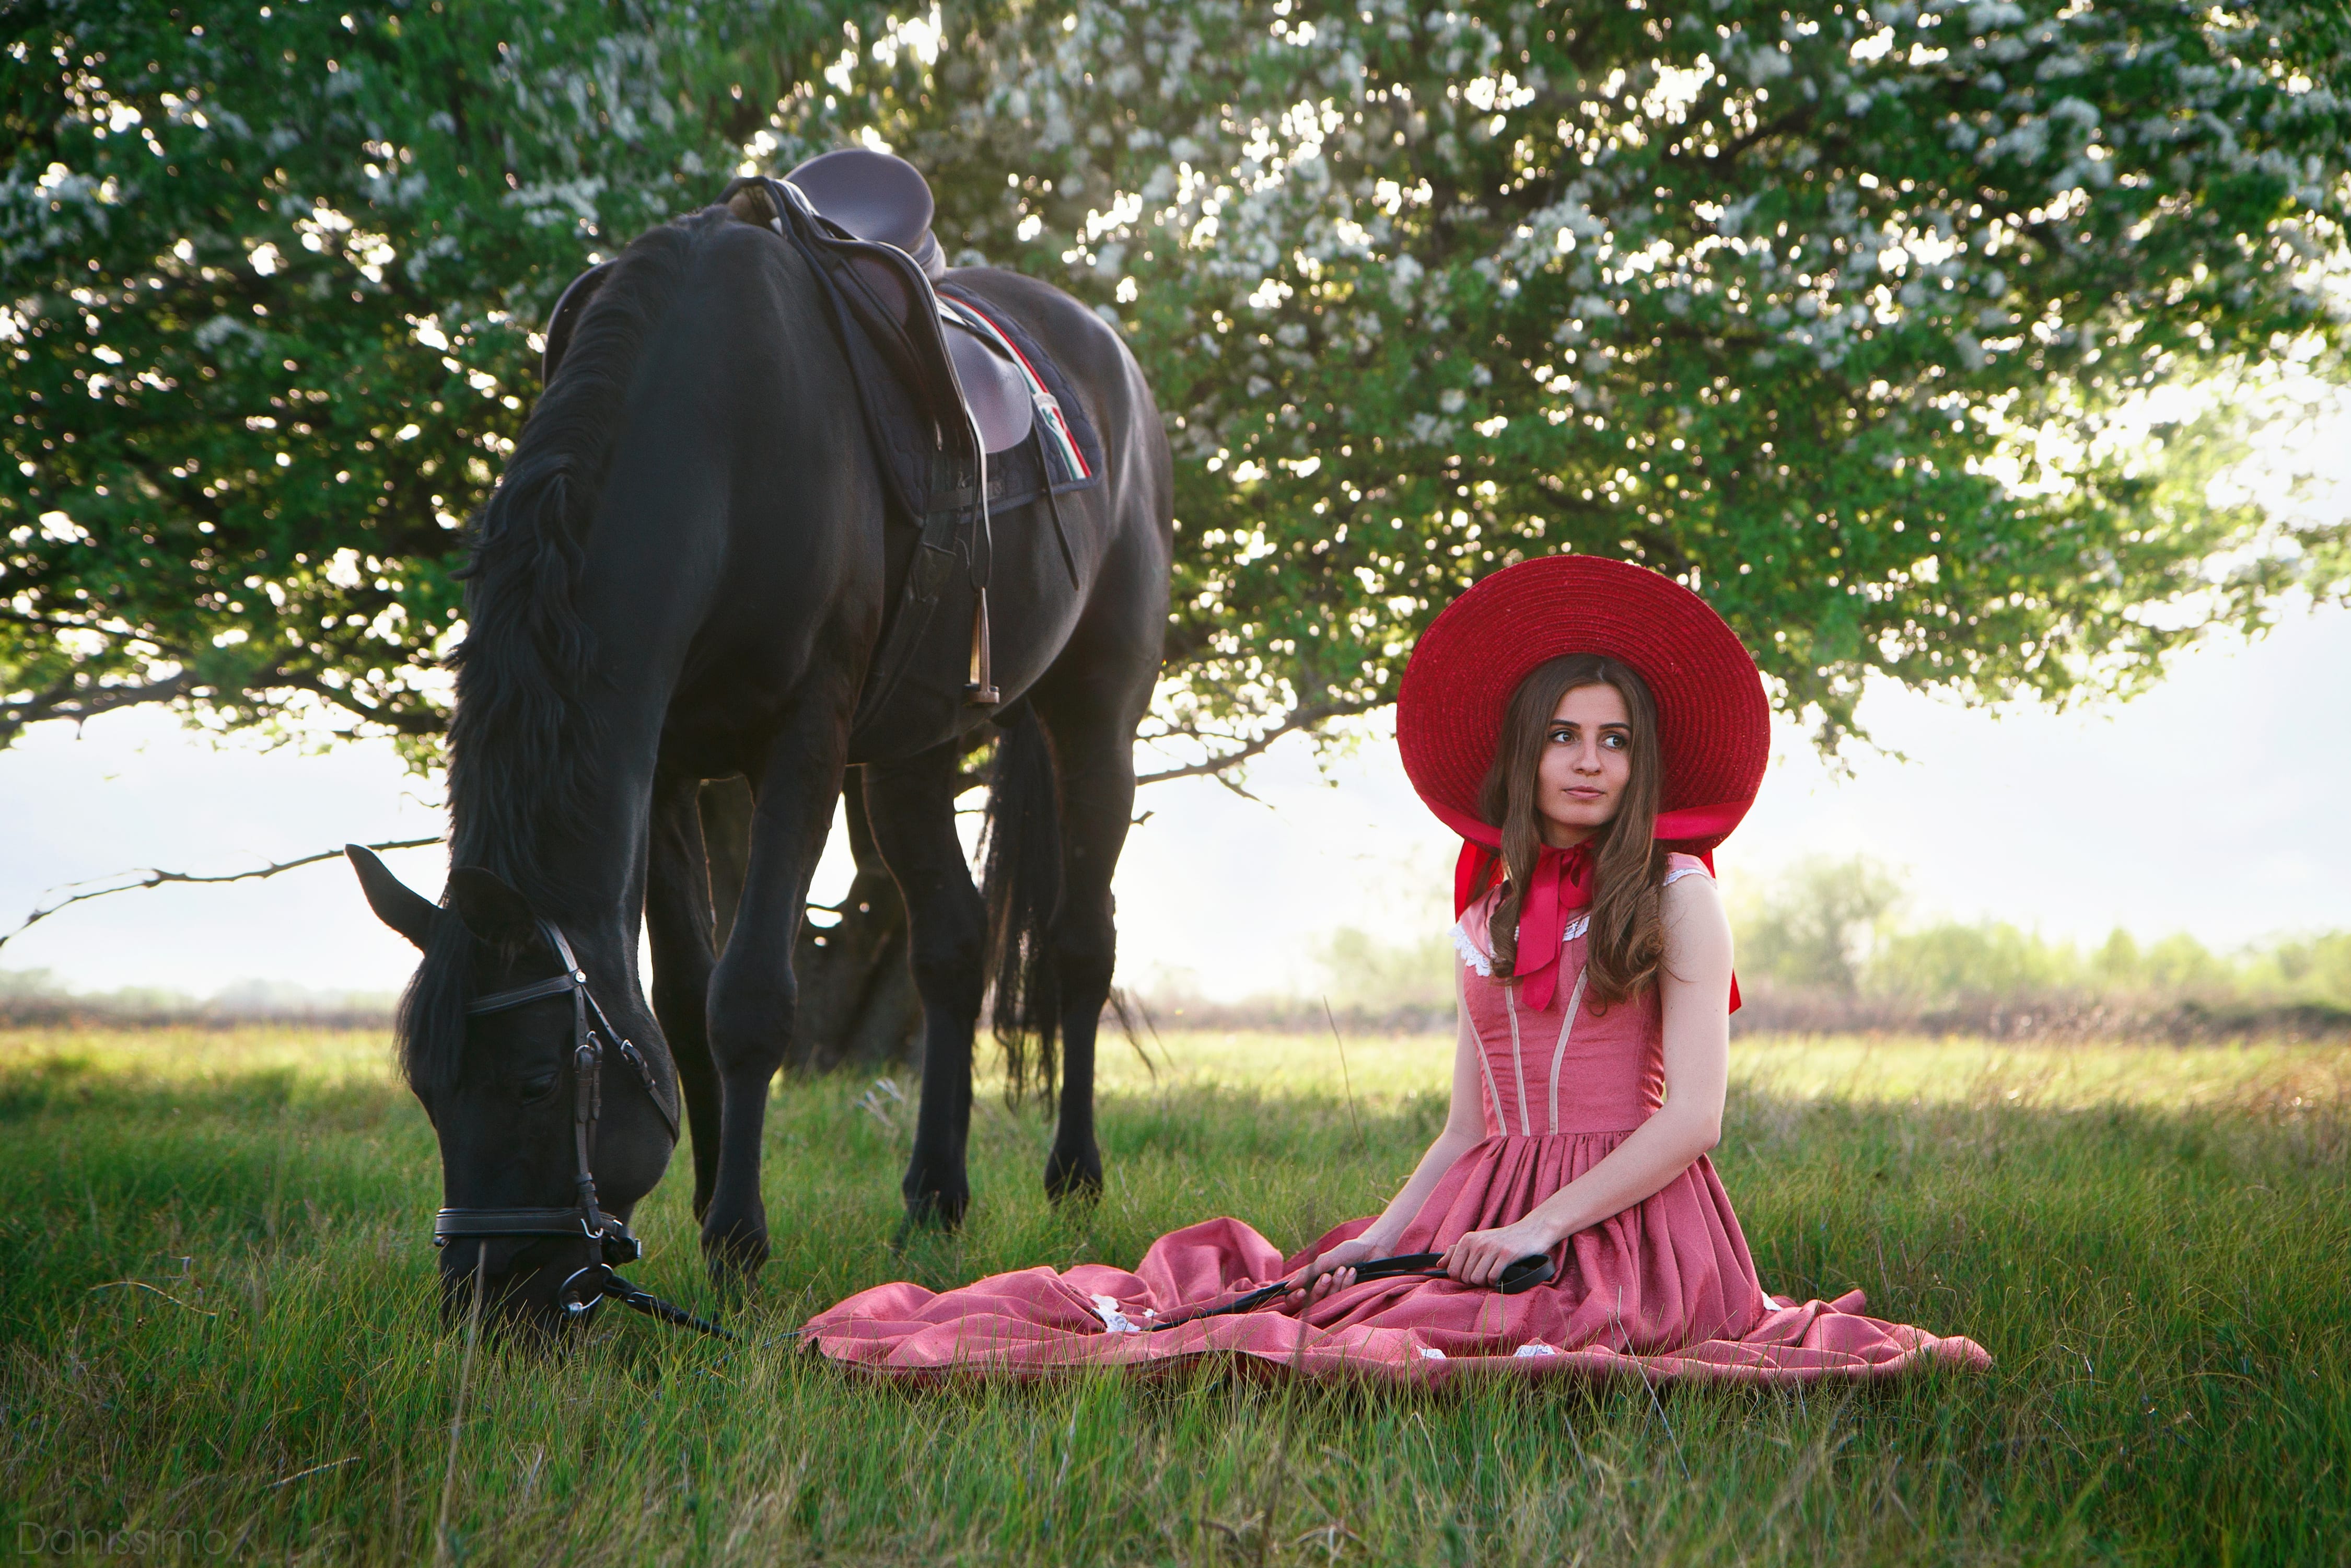 Beautiful princess resting on the grass in pink dress with her horse